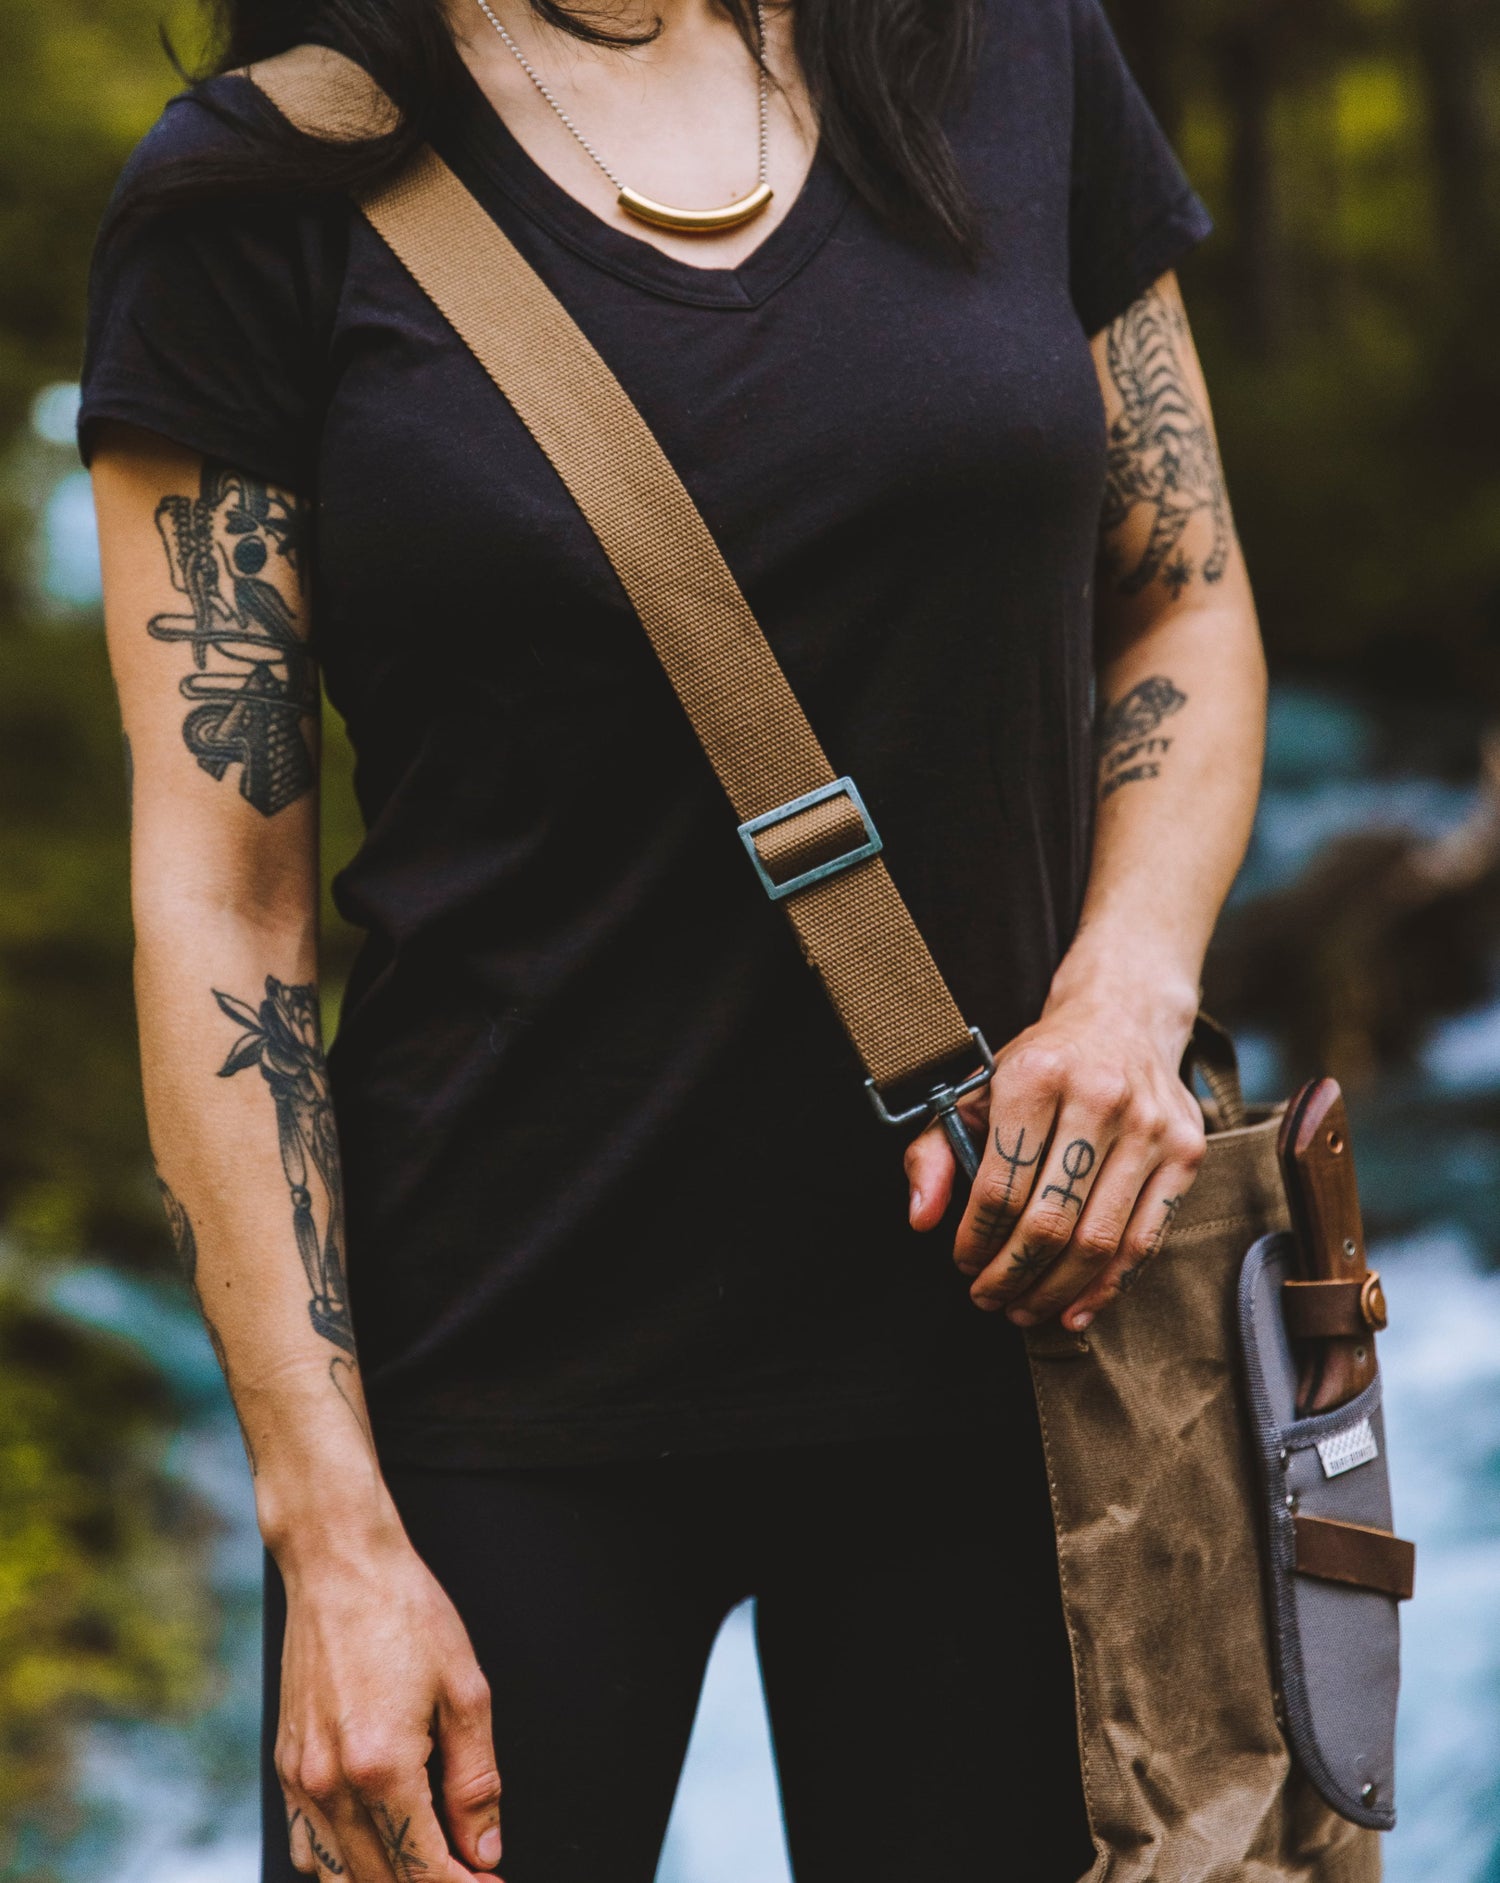 Woman in her black v-neck tee. She has some impressive tattoos on her arms